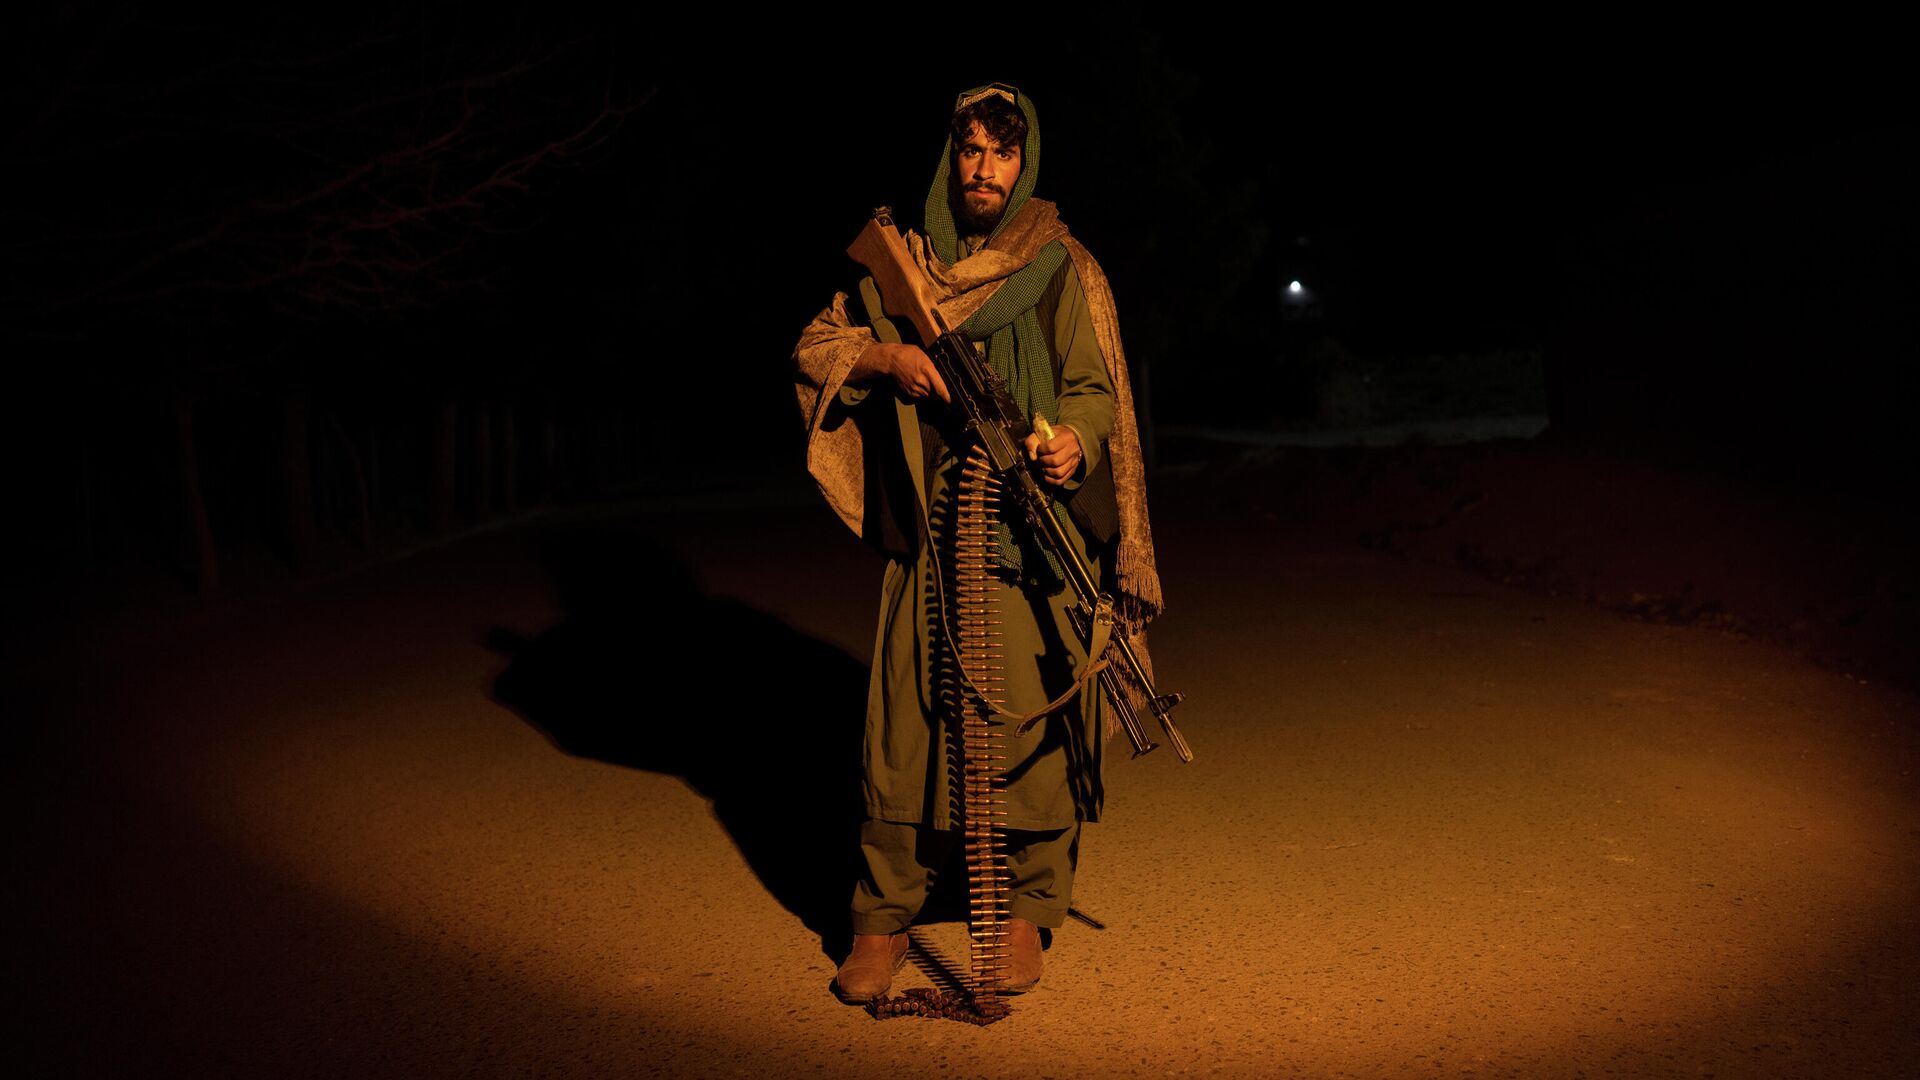 A Taliban fighter poses for a photo at a check point in Herat Afghanistan, on Monday, Nov. 29, 2021 - Sputnik International, 1920, 13.04.2022